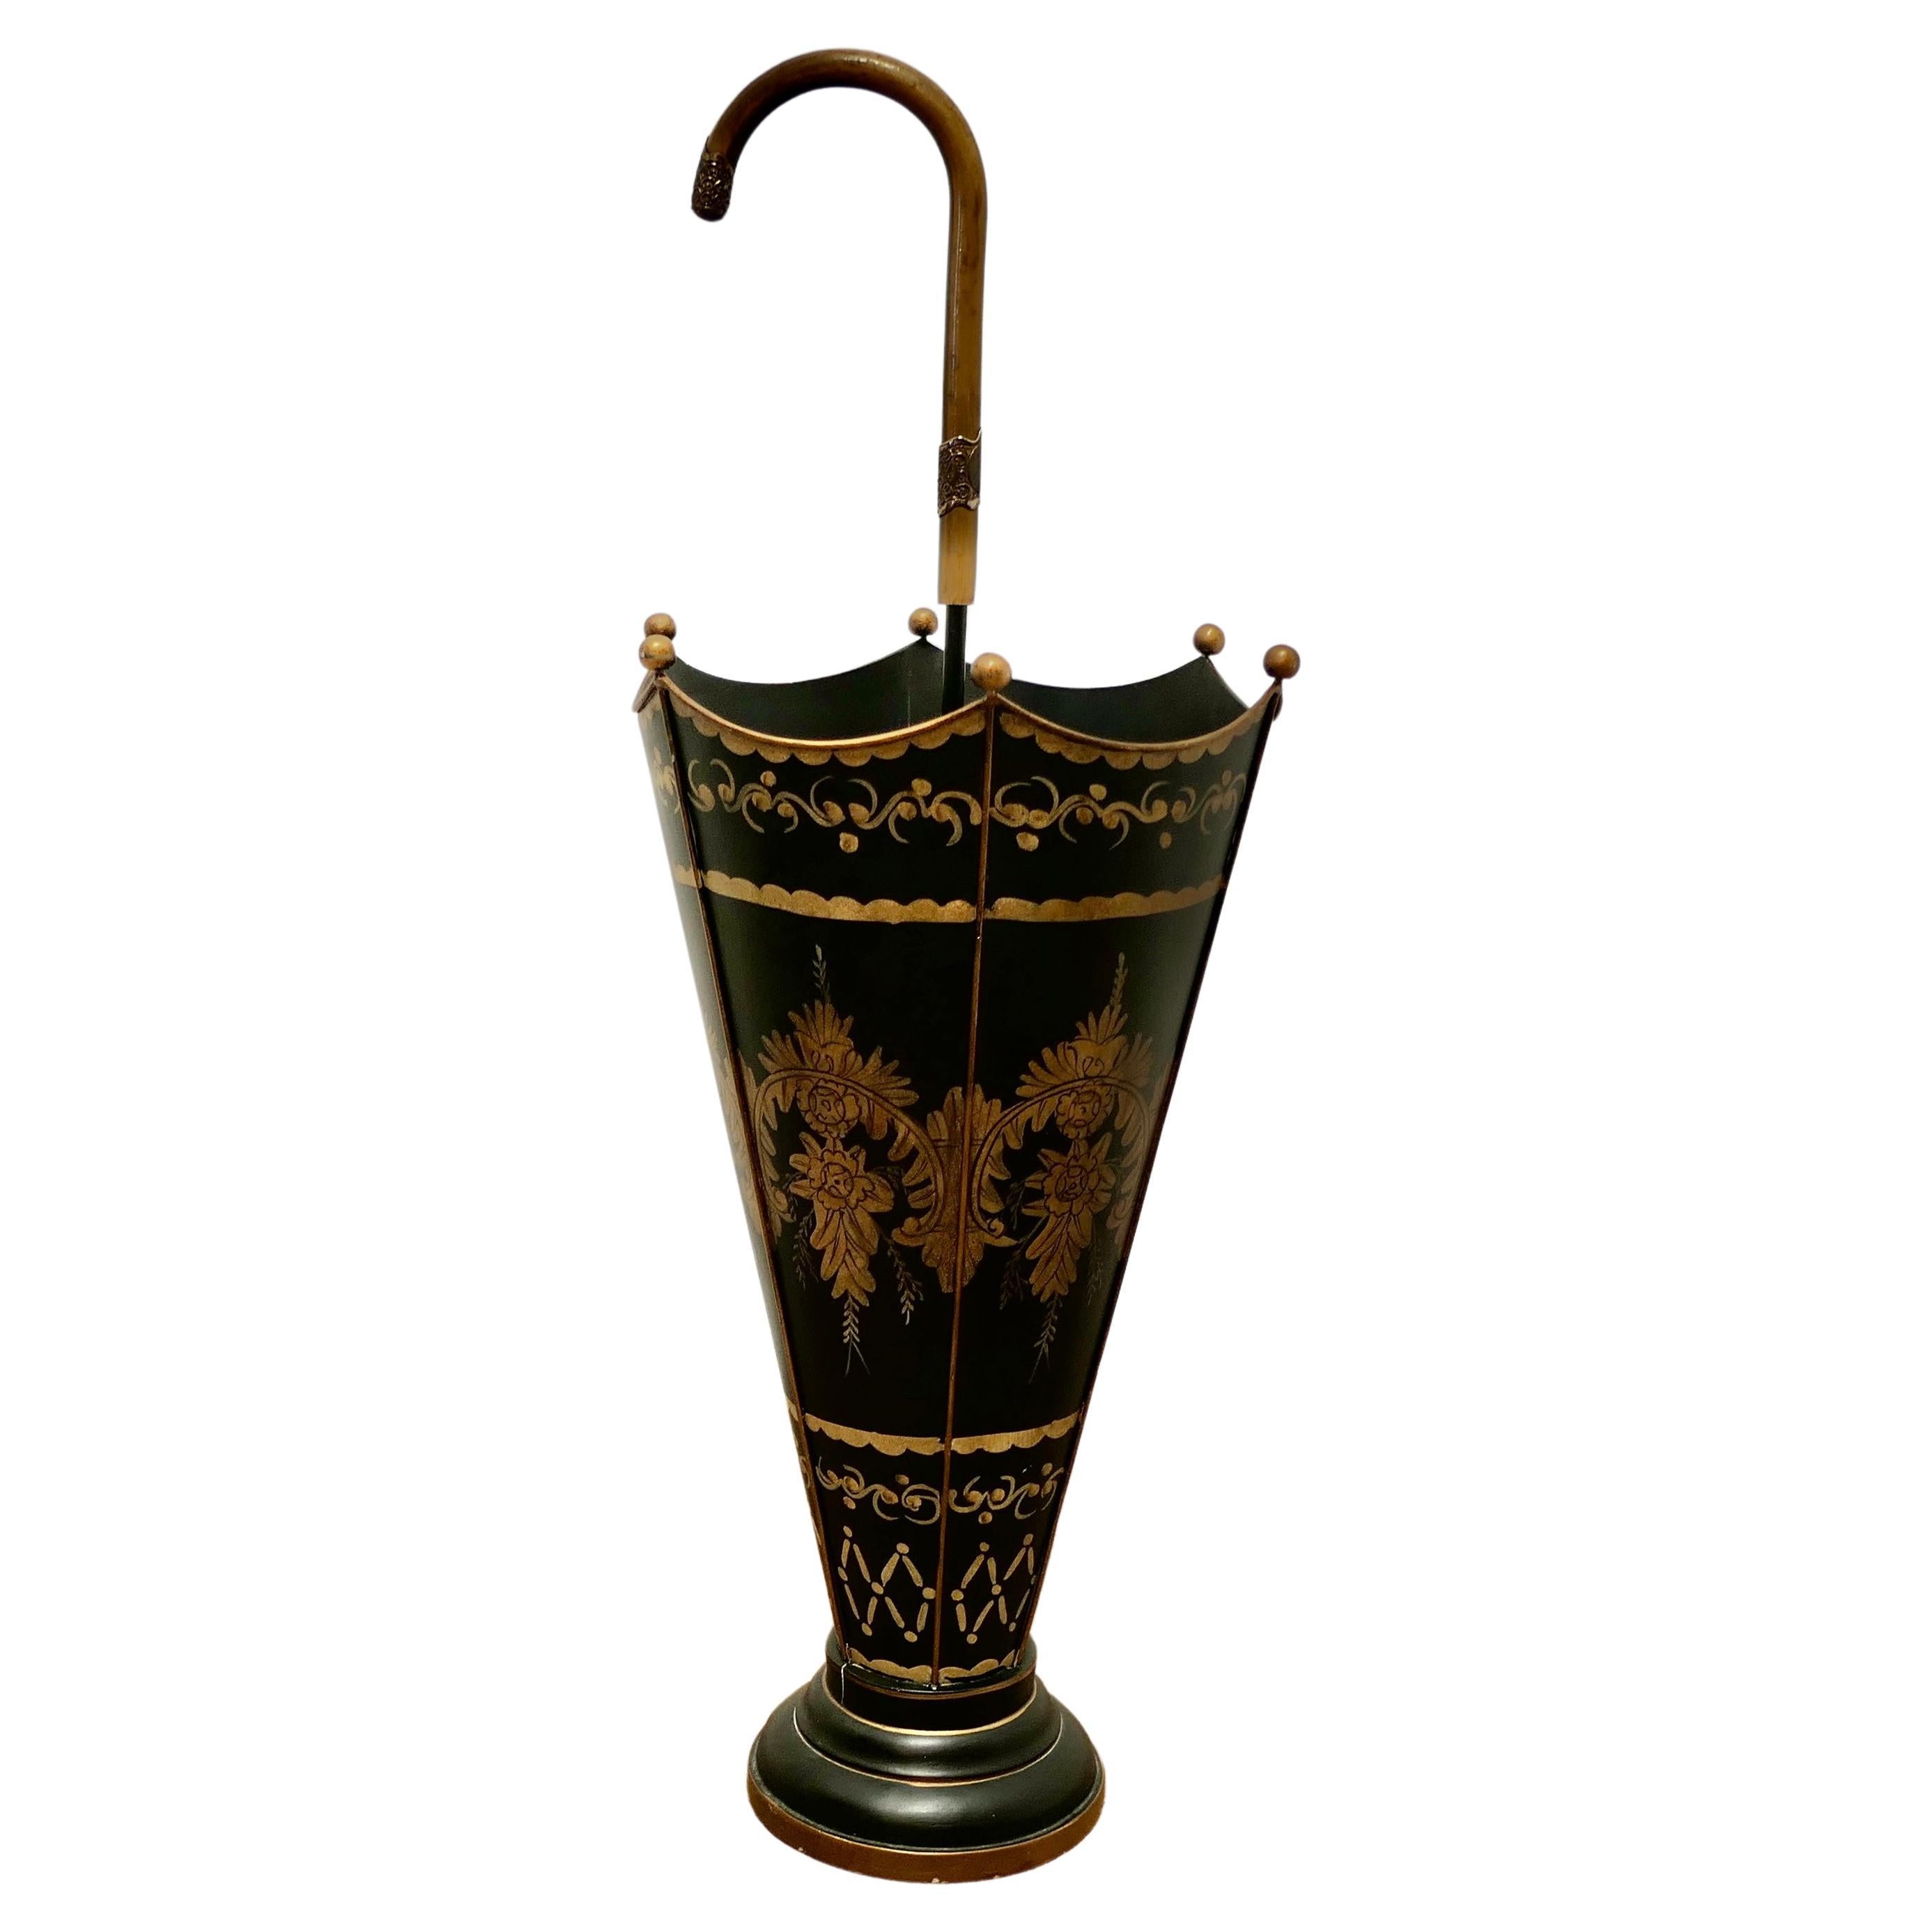 A Superb Italian Toleware Umbrella Stand, Hand Painted Gold on Black    For Sale